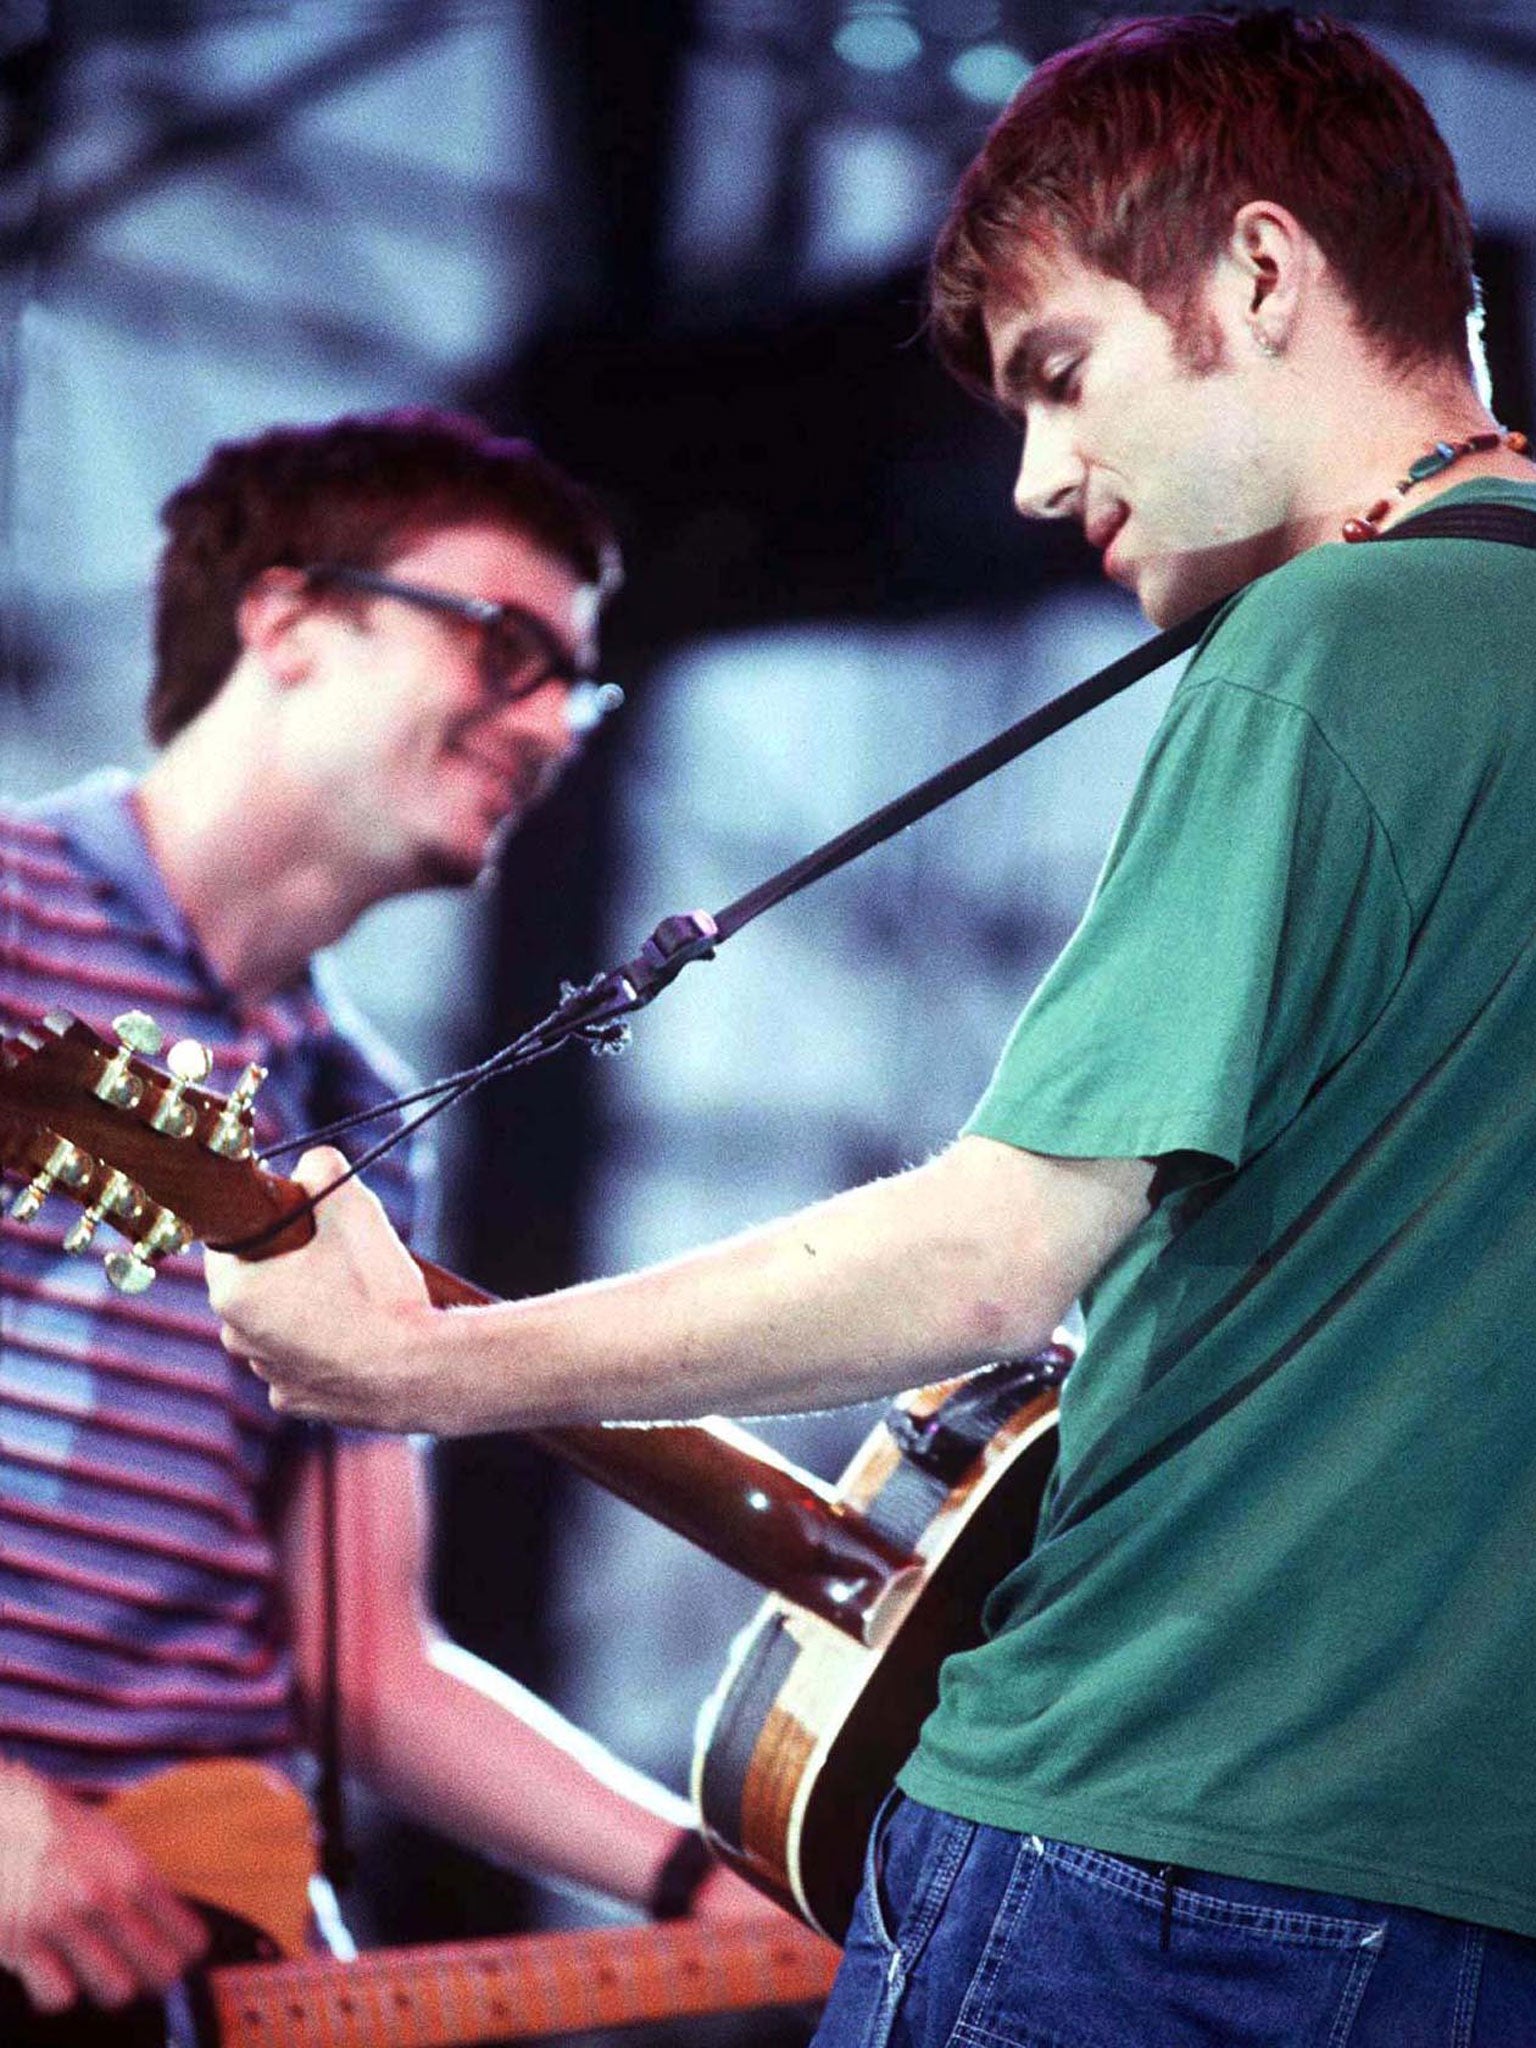 Damon Albarn and Graham Coxon of Blur on stage in 1997 (Rex)